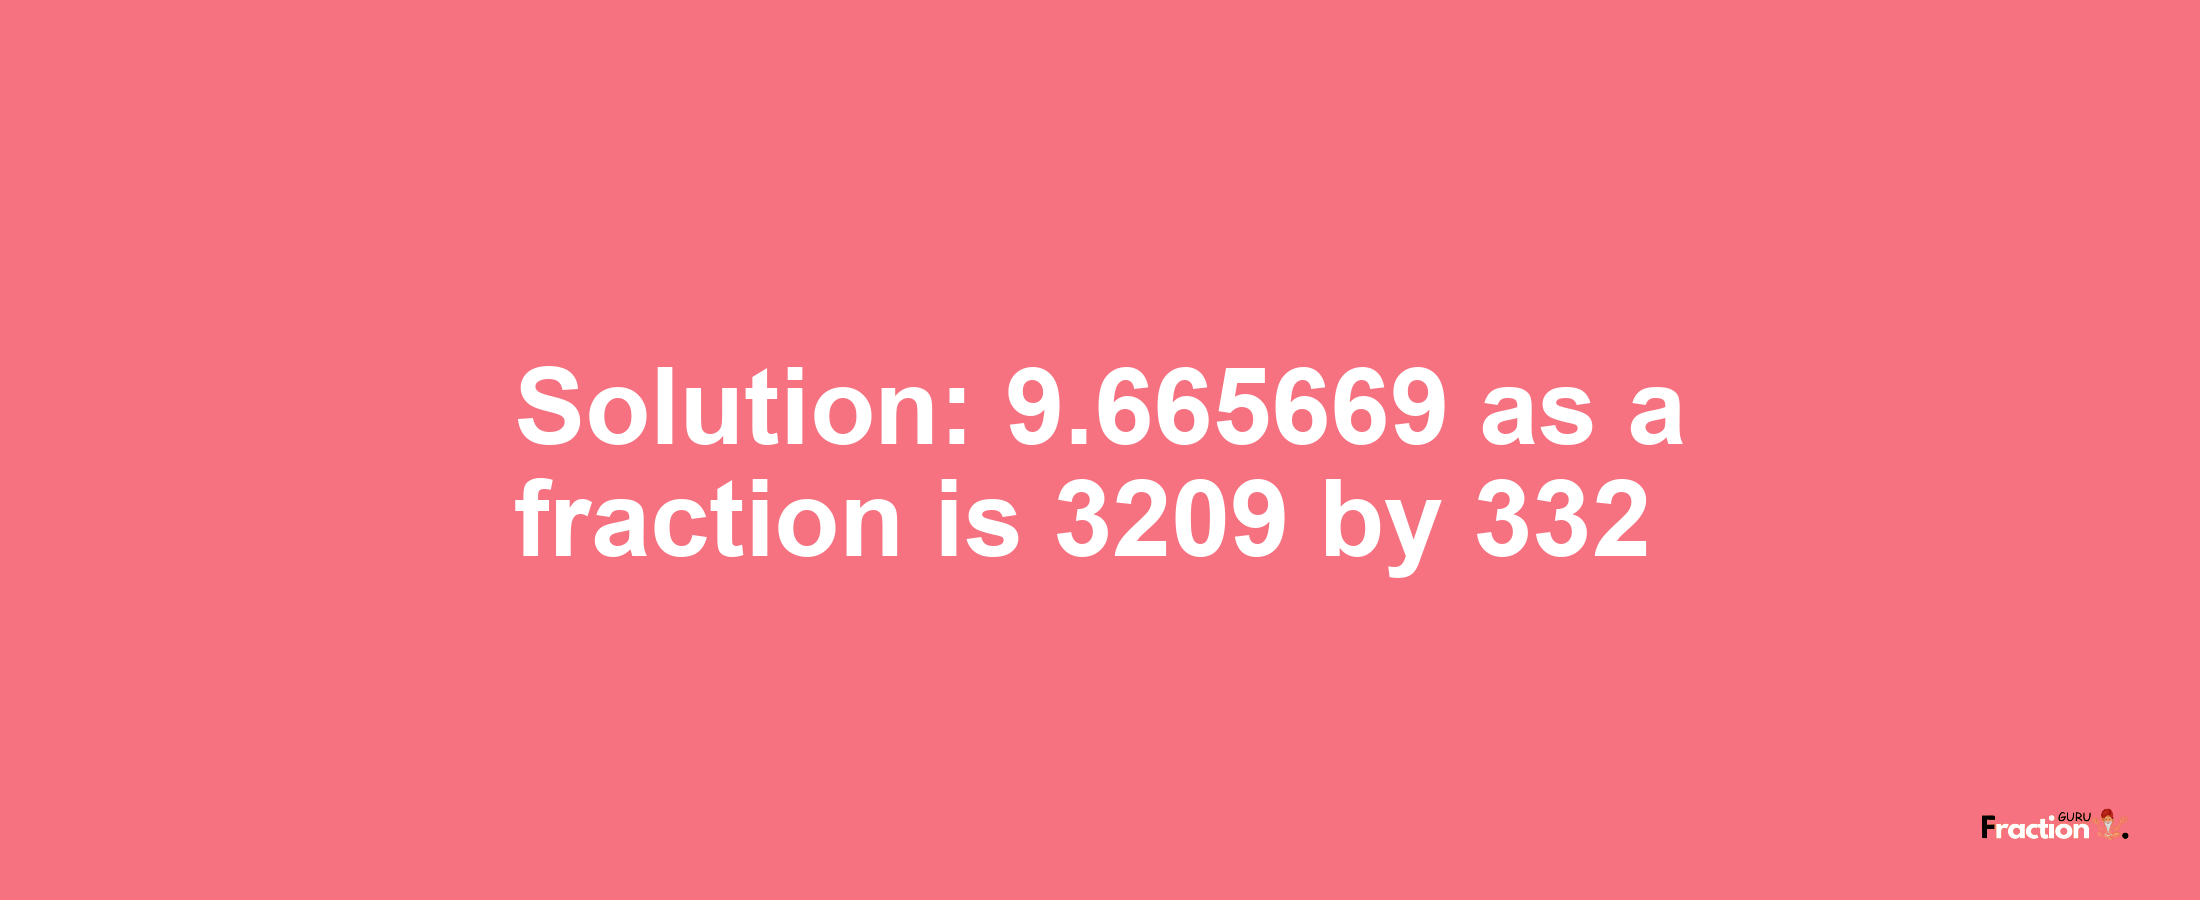 Solution:9.665669 as a fraction is 3209/332